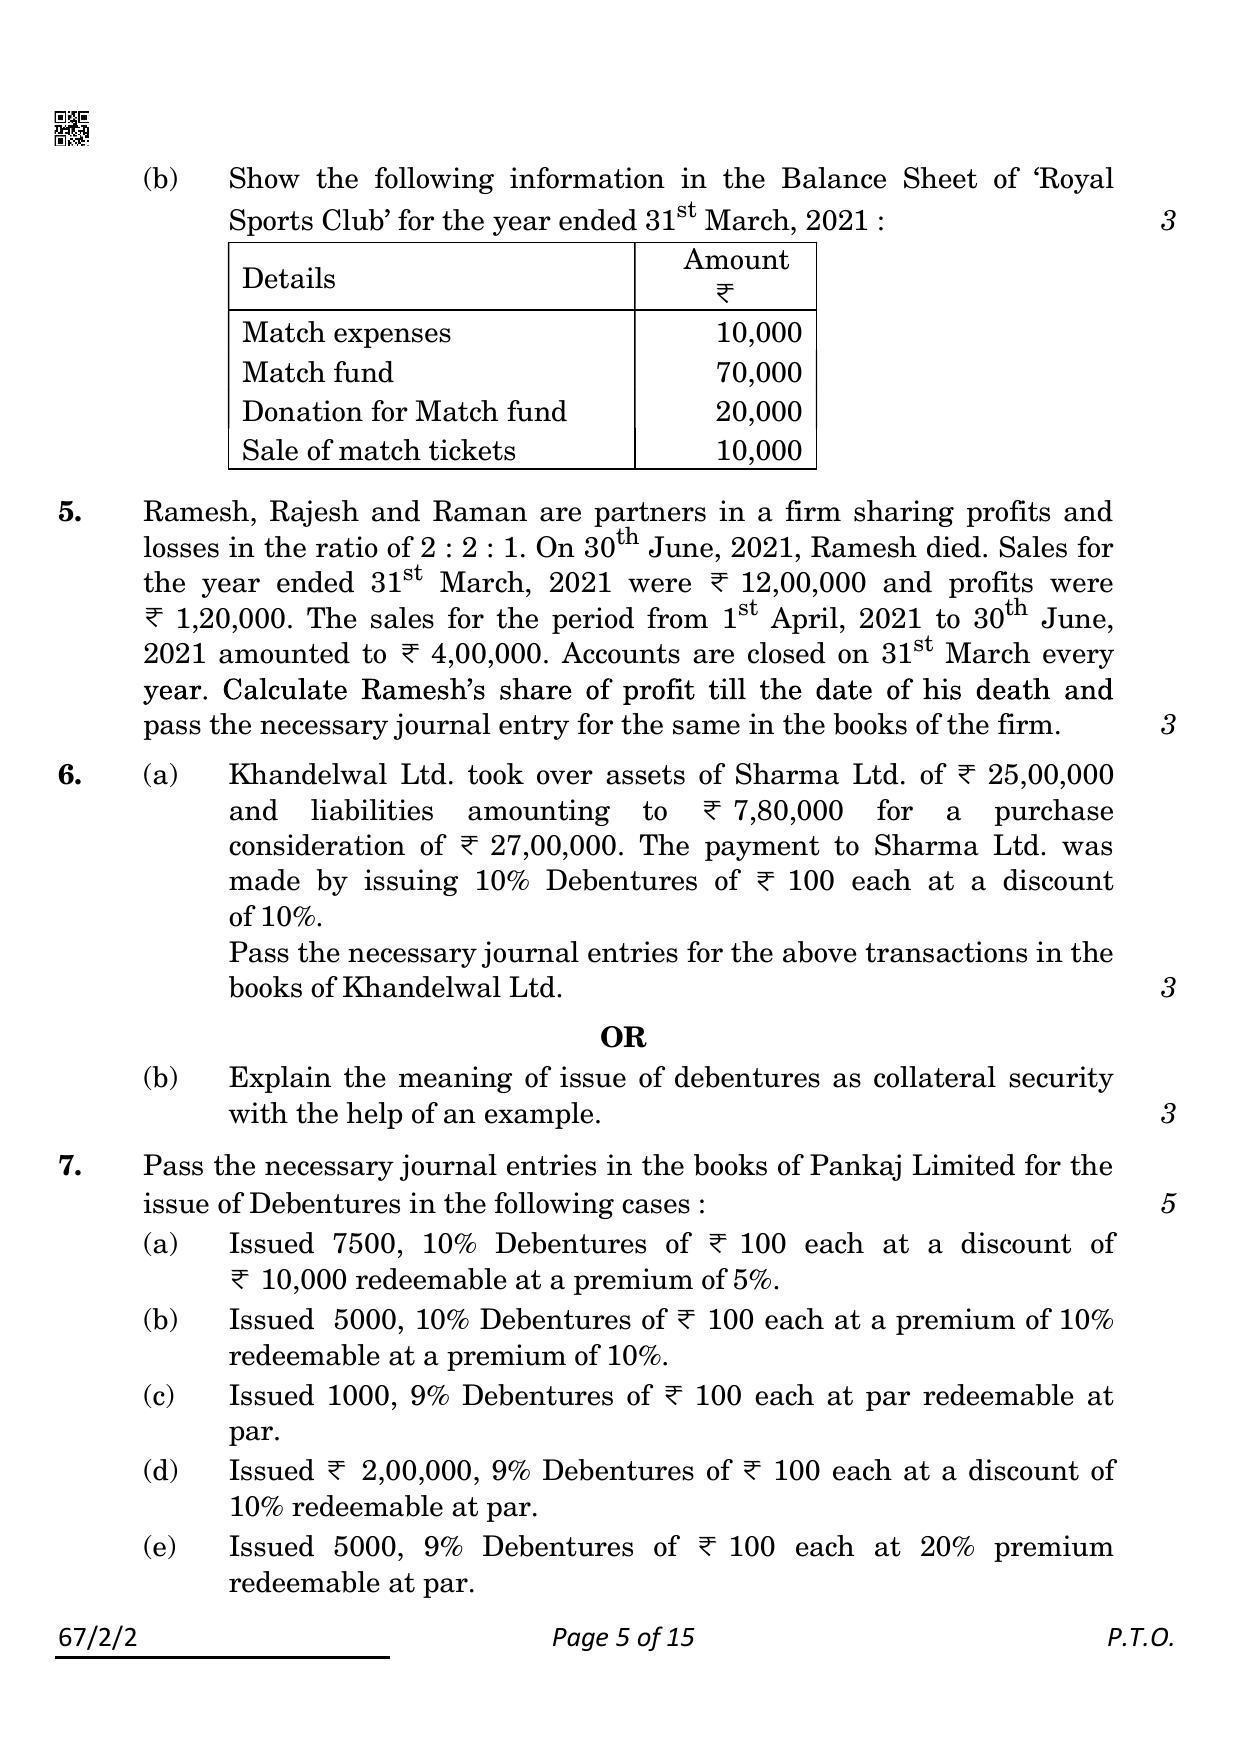 CBSE Class 12 67-2-2 Accountancy 2022 Question Paper - Page 5